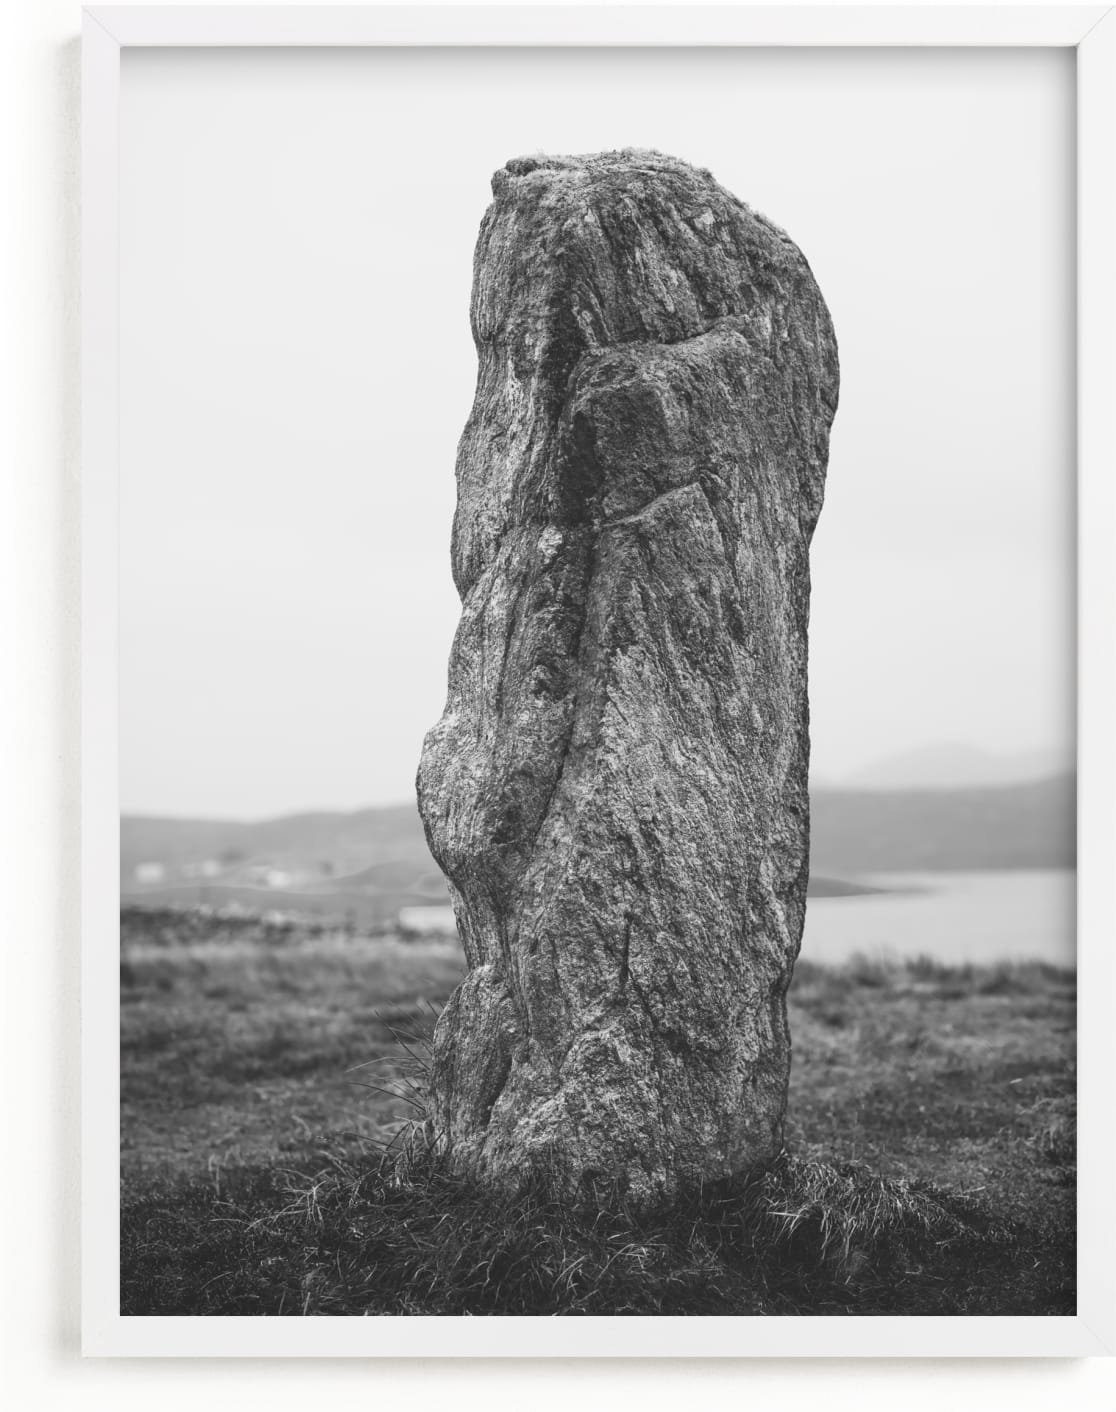 This is a black and white art by Kamala Nahas called Standing Stones III.